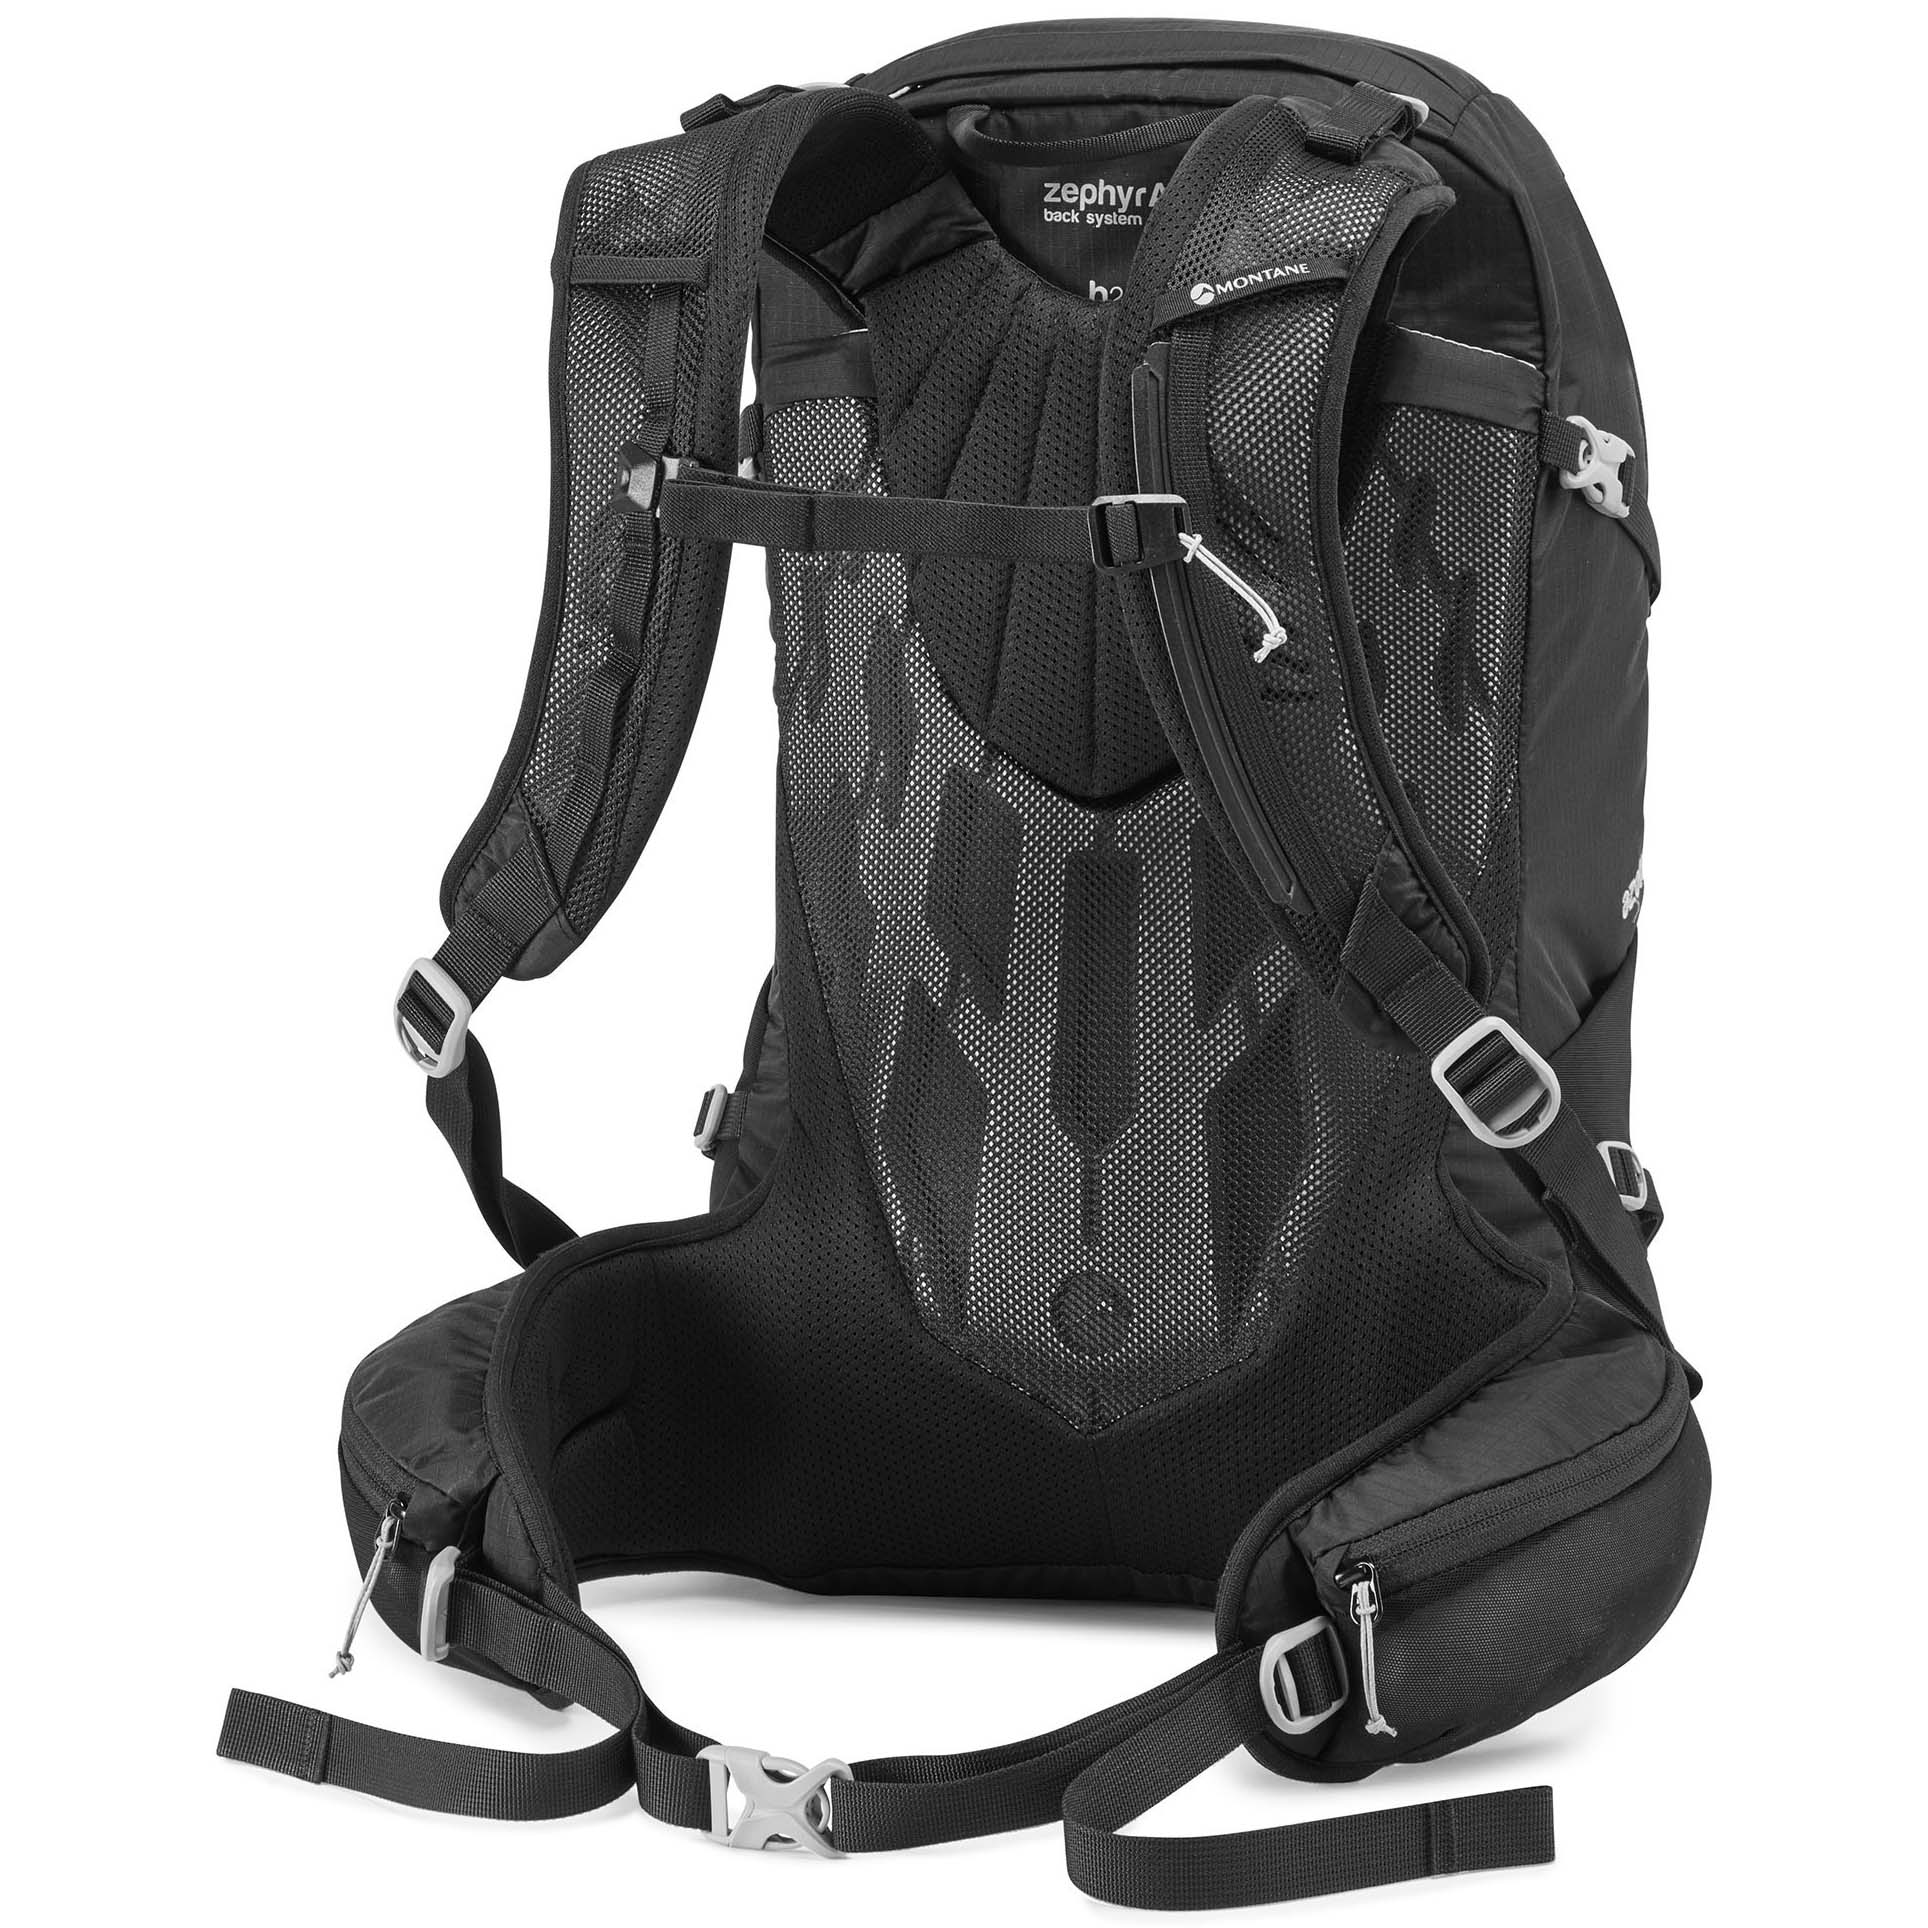 Montane Azote 25 Mountain Day Backpack